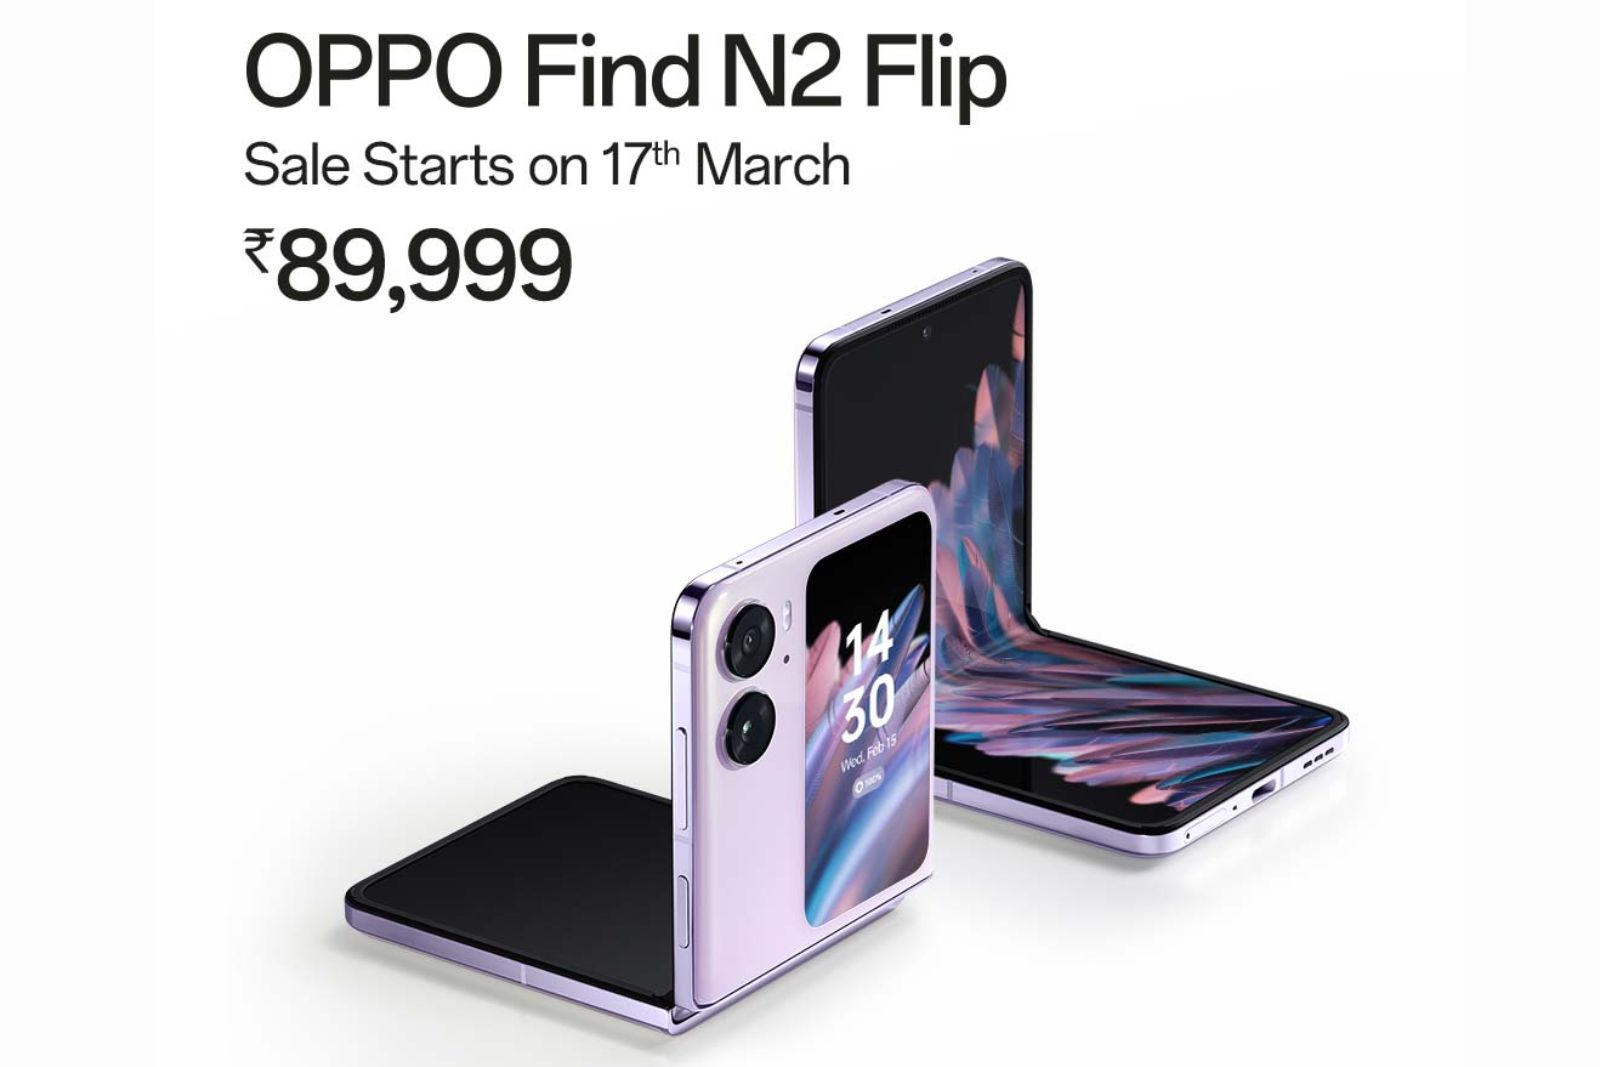 OPPO Find N2 Flip launched in India: Price starts from Rs 89999